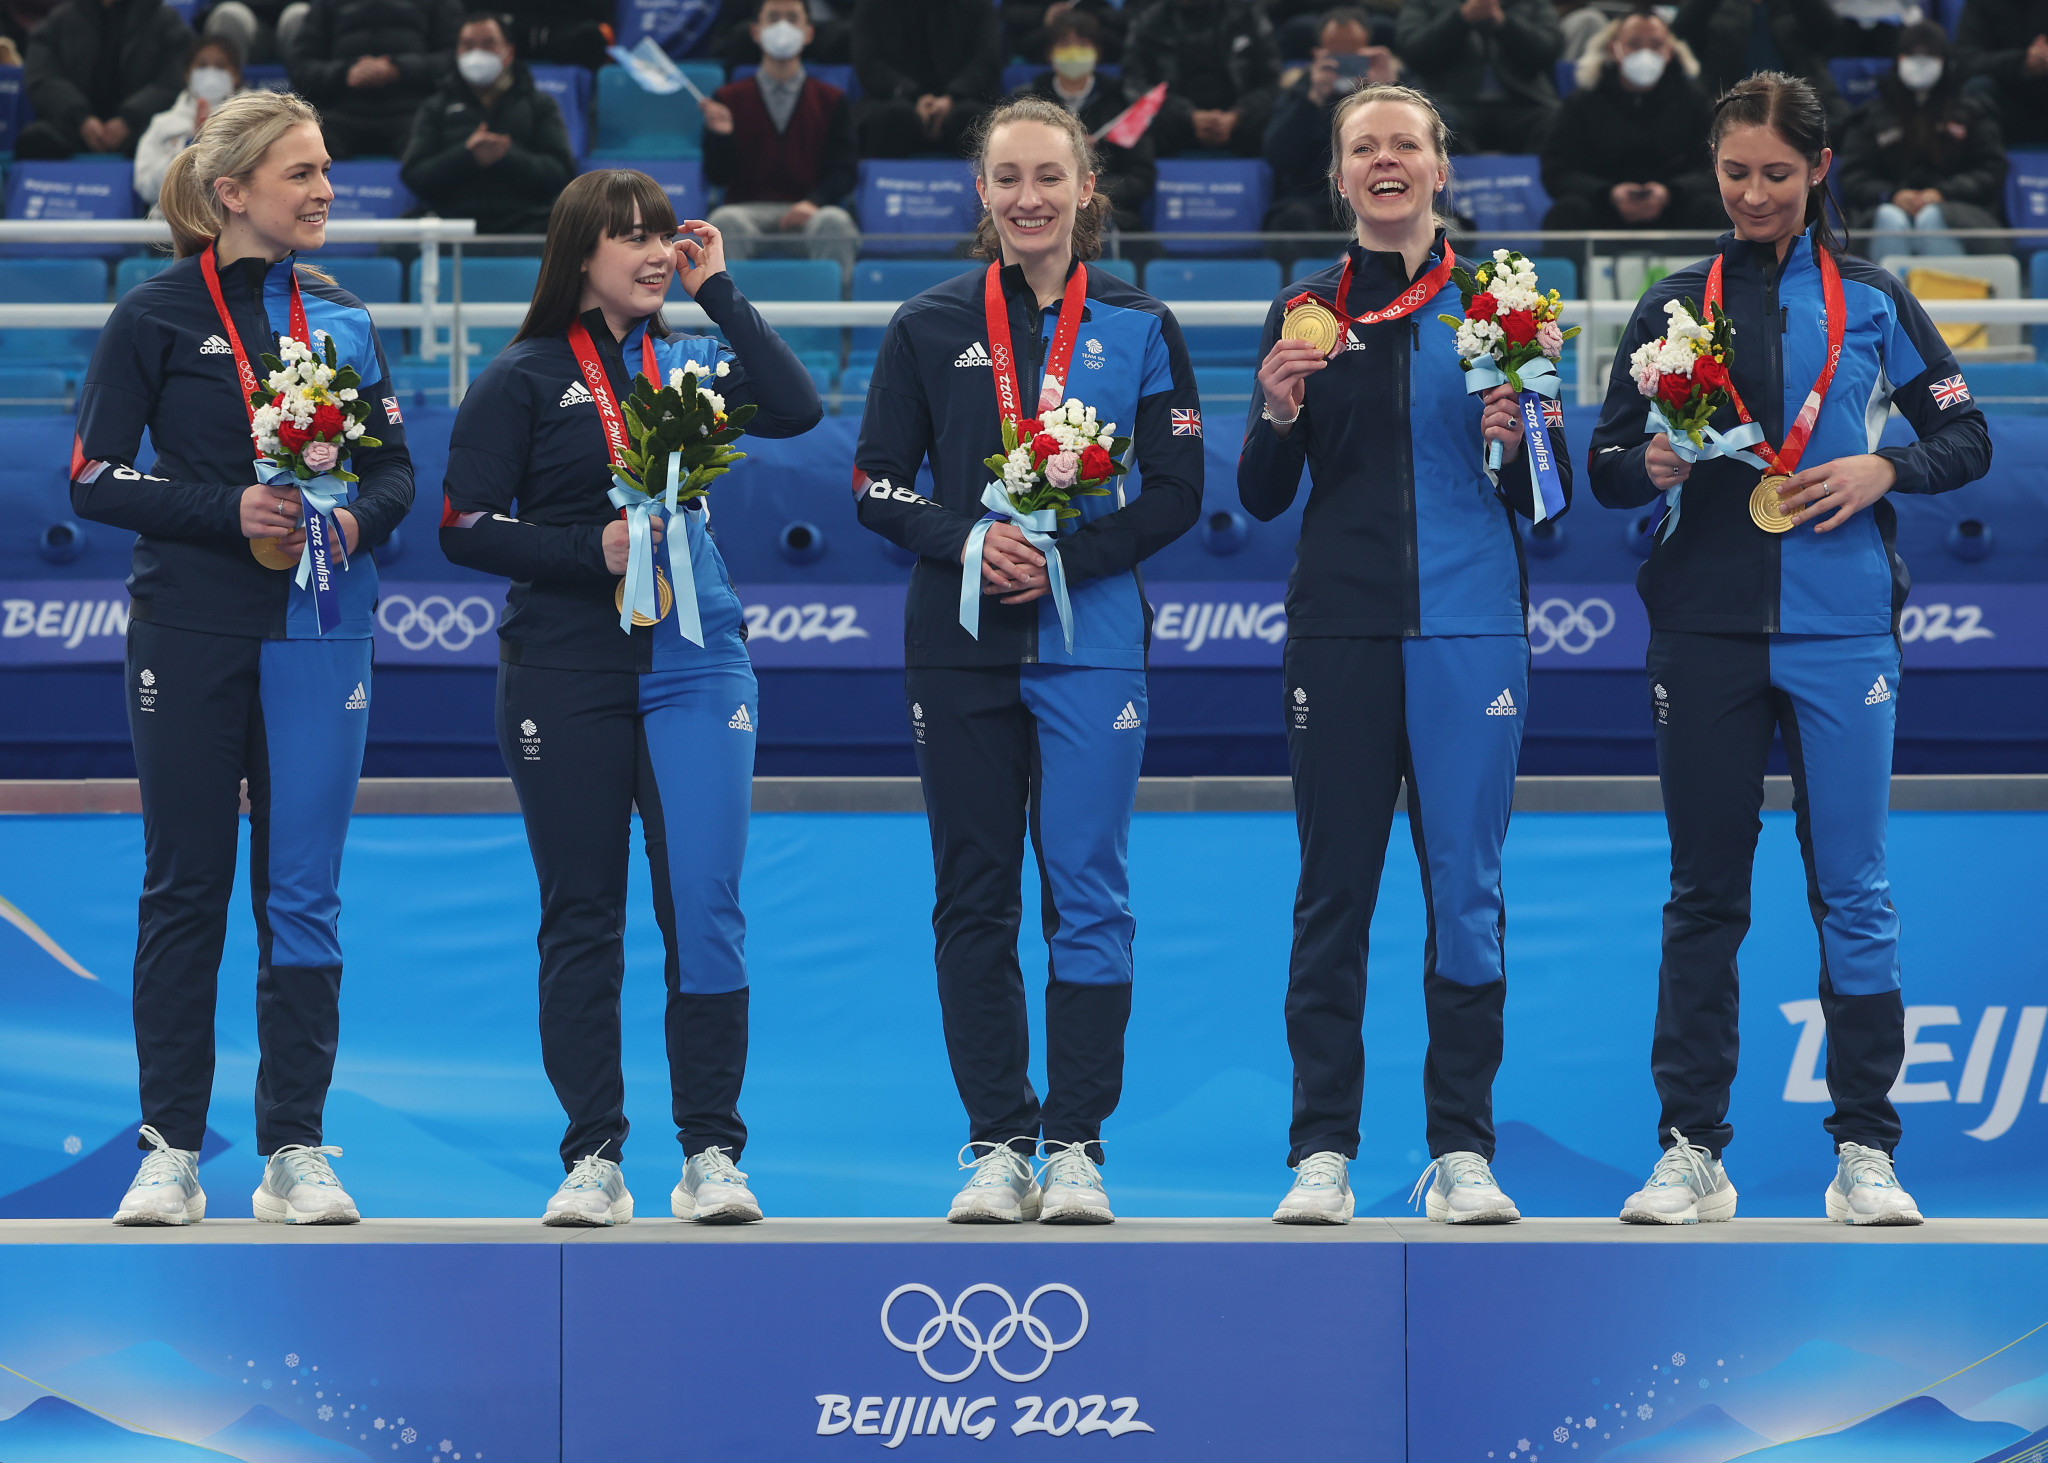 Britain won the women's curling title, and the nation's first gold medal of Beijing 2022 ©Getty Images